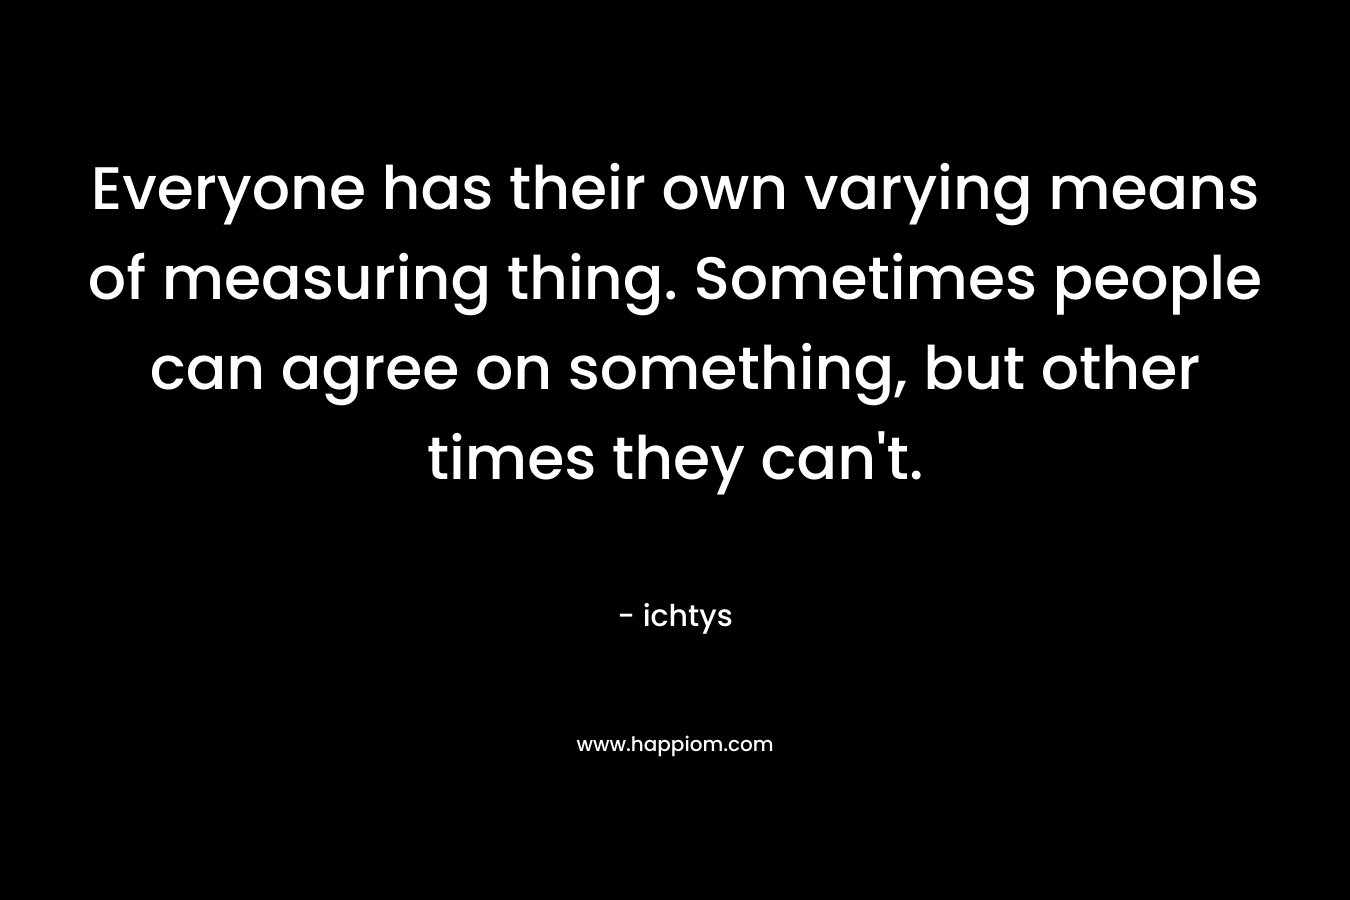 Everyone has their own varying means of measuring thing. Sometimes people can agree on something, but other times they can’t. – ichtys